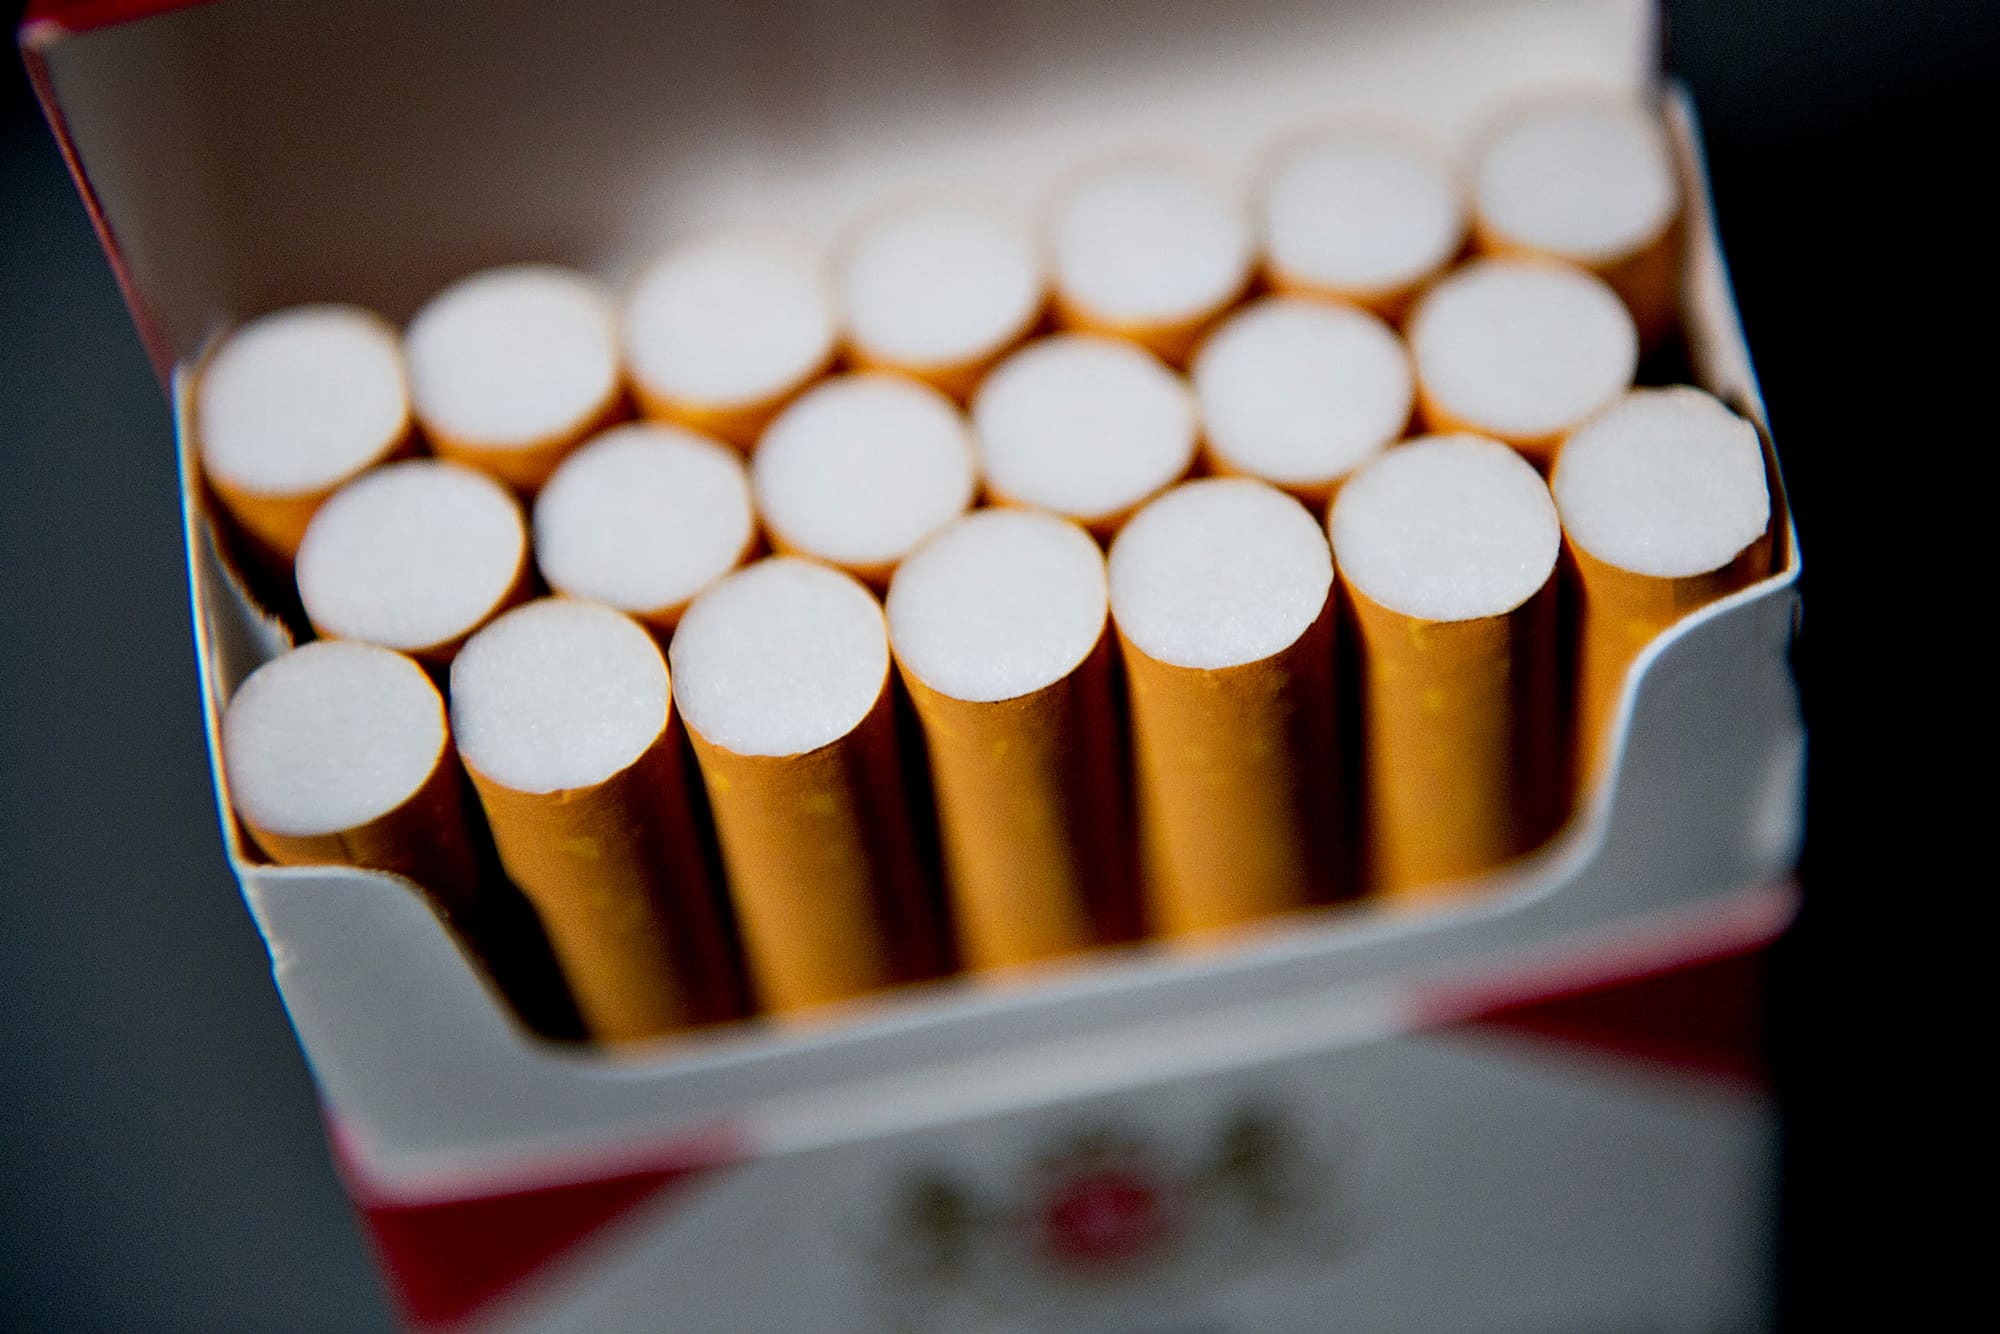 Biden intends to limit nicotine to cigarettes